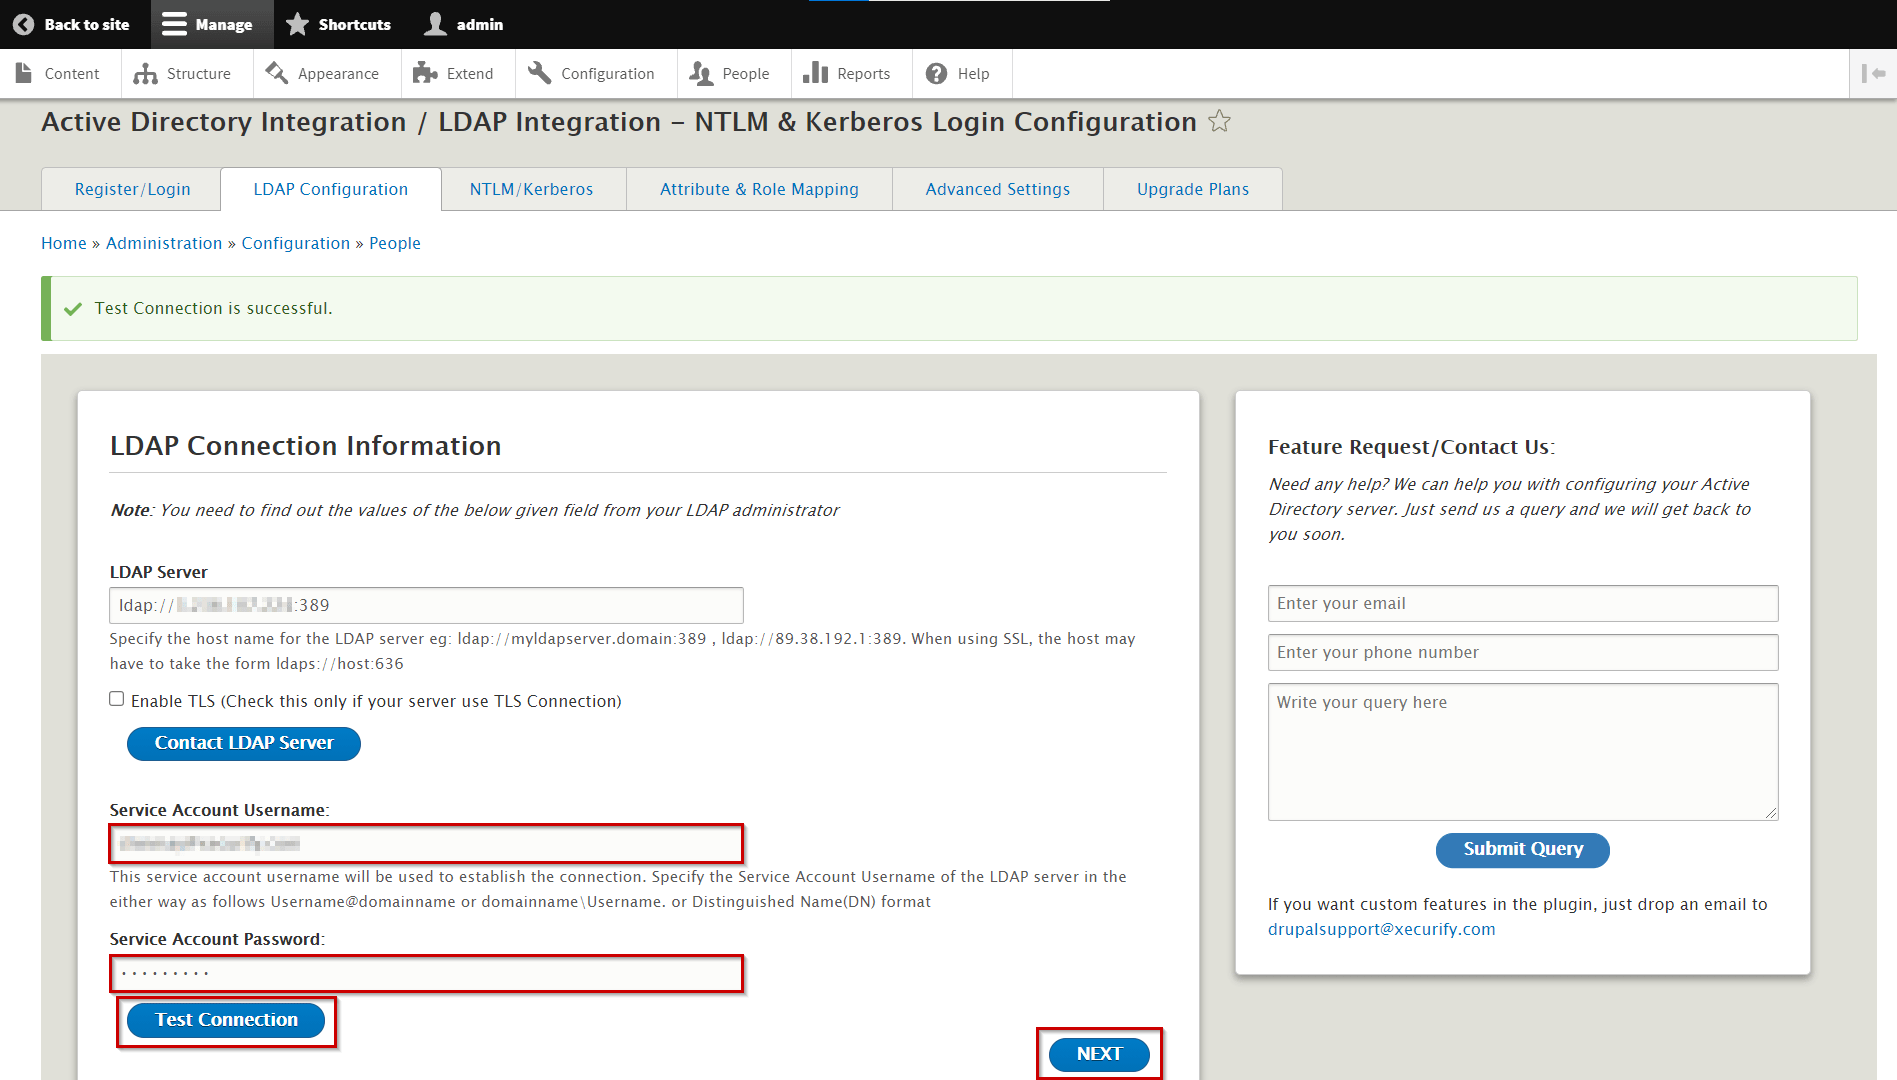 Enter the Service Account Username and Service Account Password then click to Test Connection